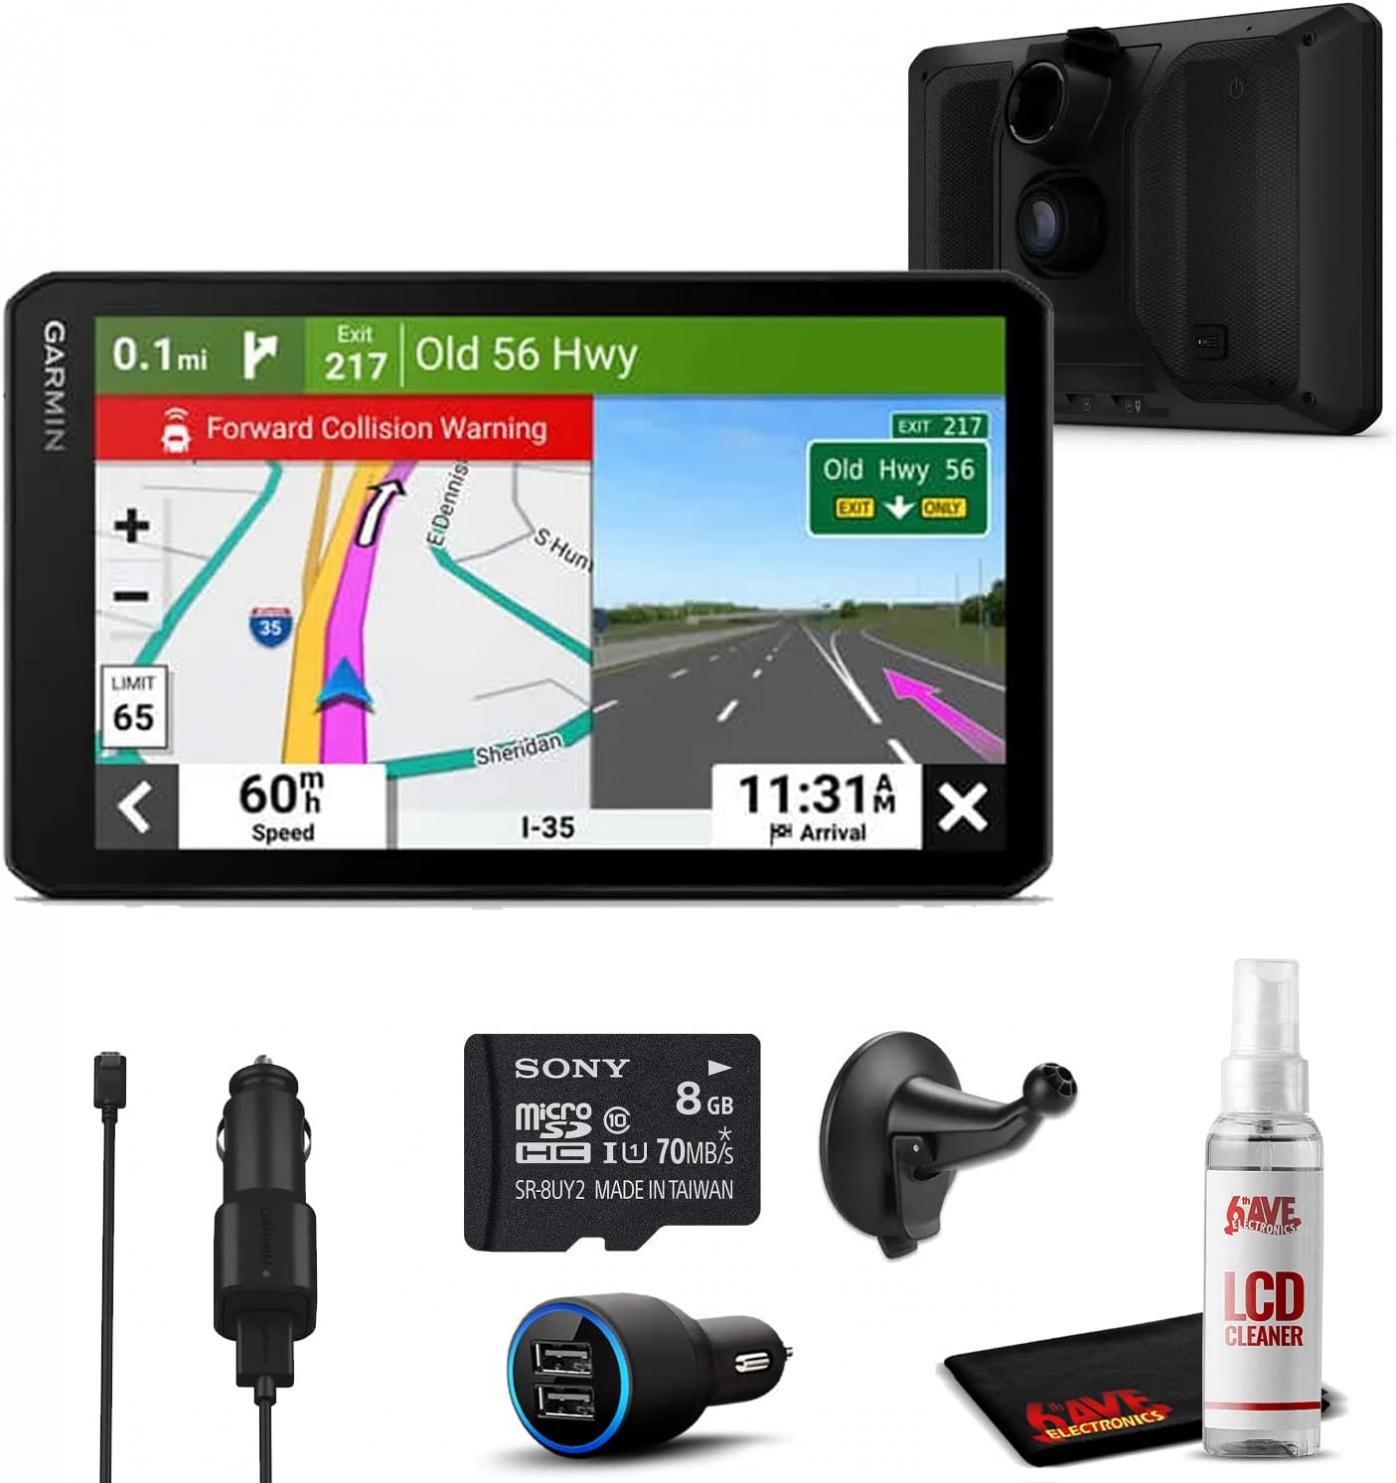 Garmin DriveCam 76 7-Inch GPS Navigator with Built-in Dash Cam with 8GB MicroSD Card, 6Ave Travel & Cleaning Bundle